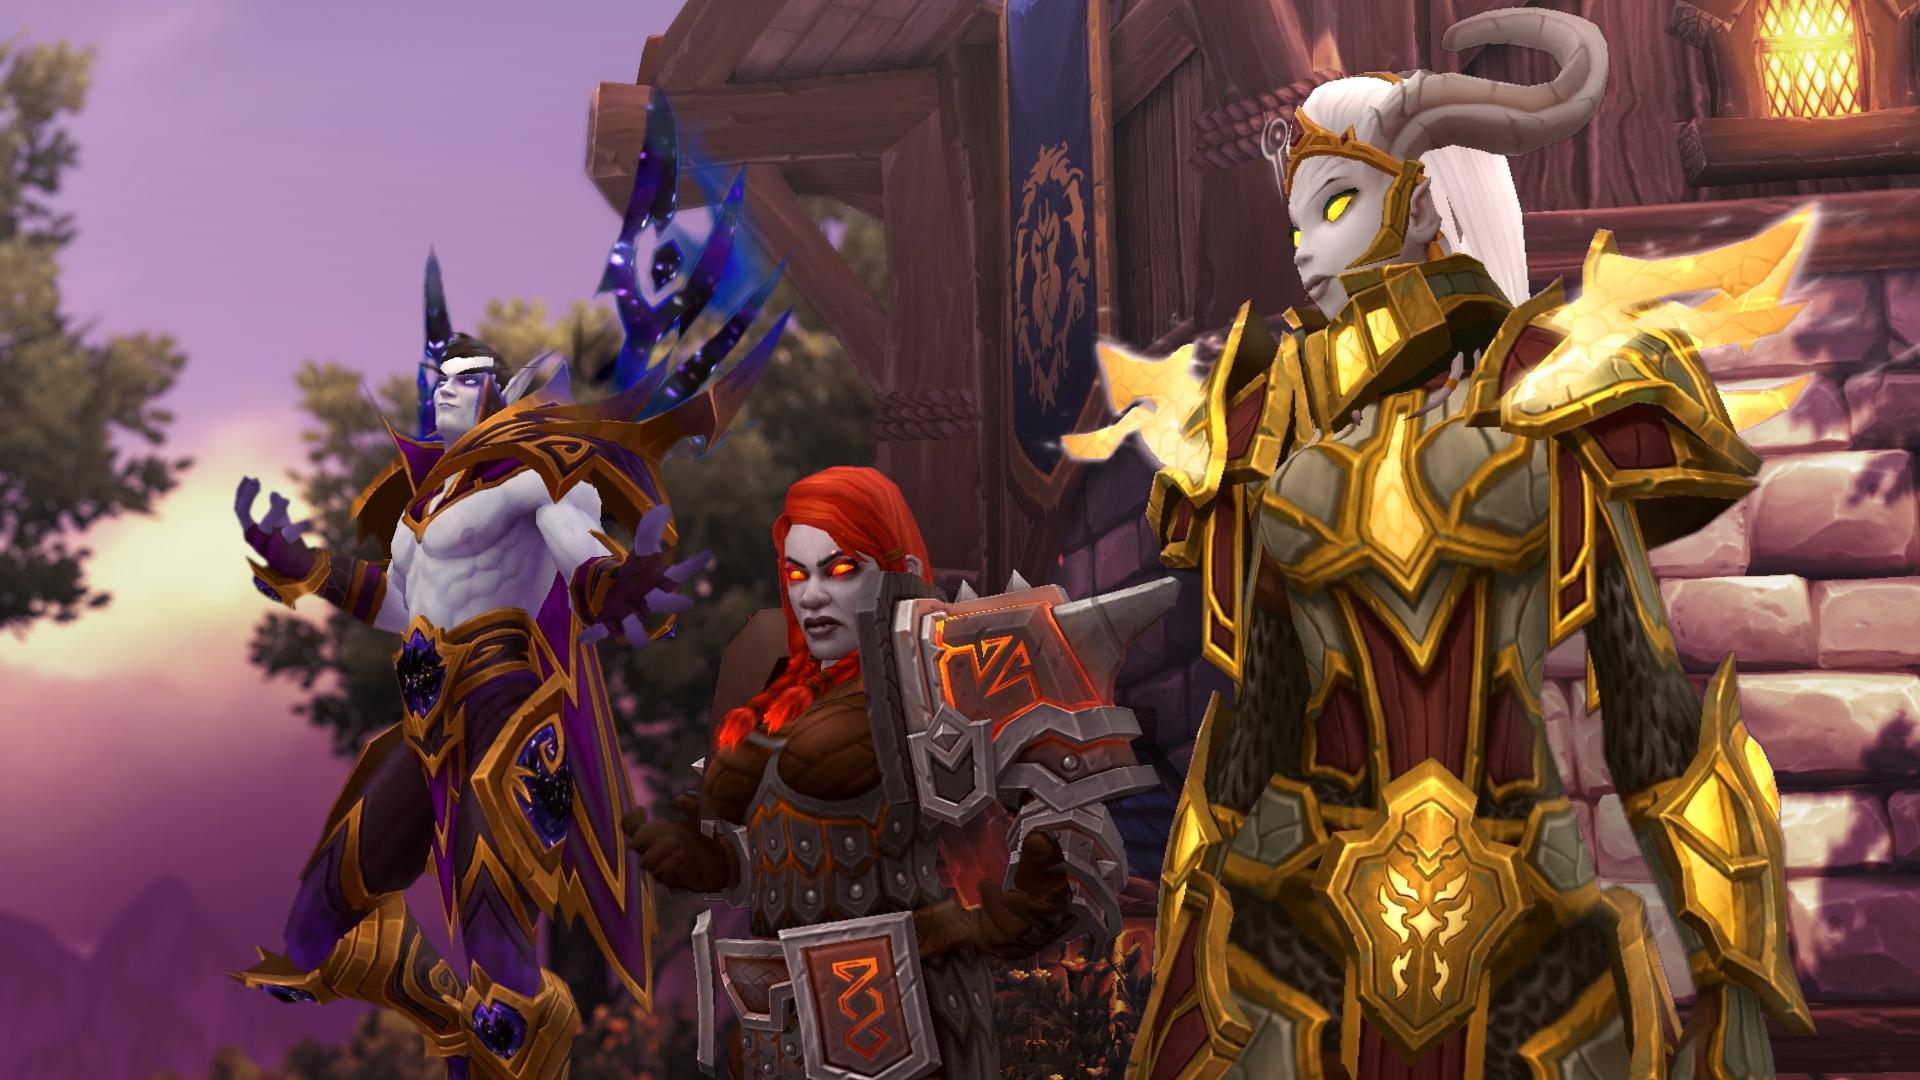 World Of Warcraft’ New Expansion Battle For Azeroth Is About Horde Vs. Alliance